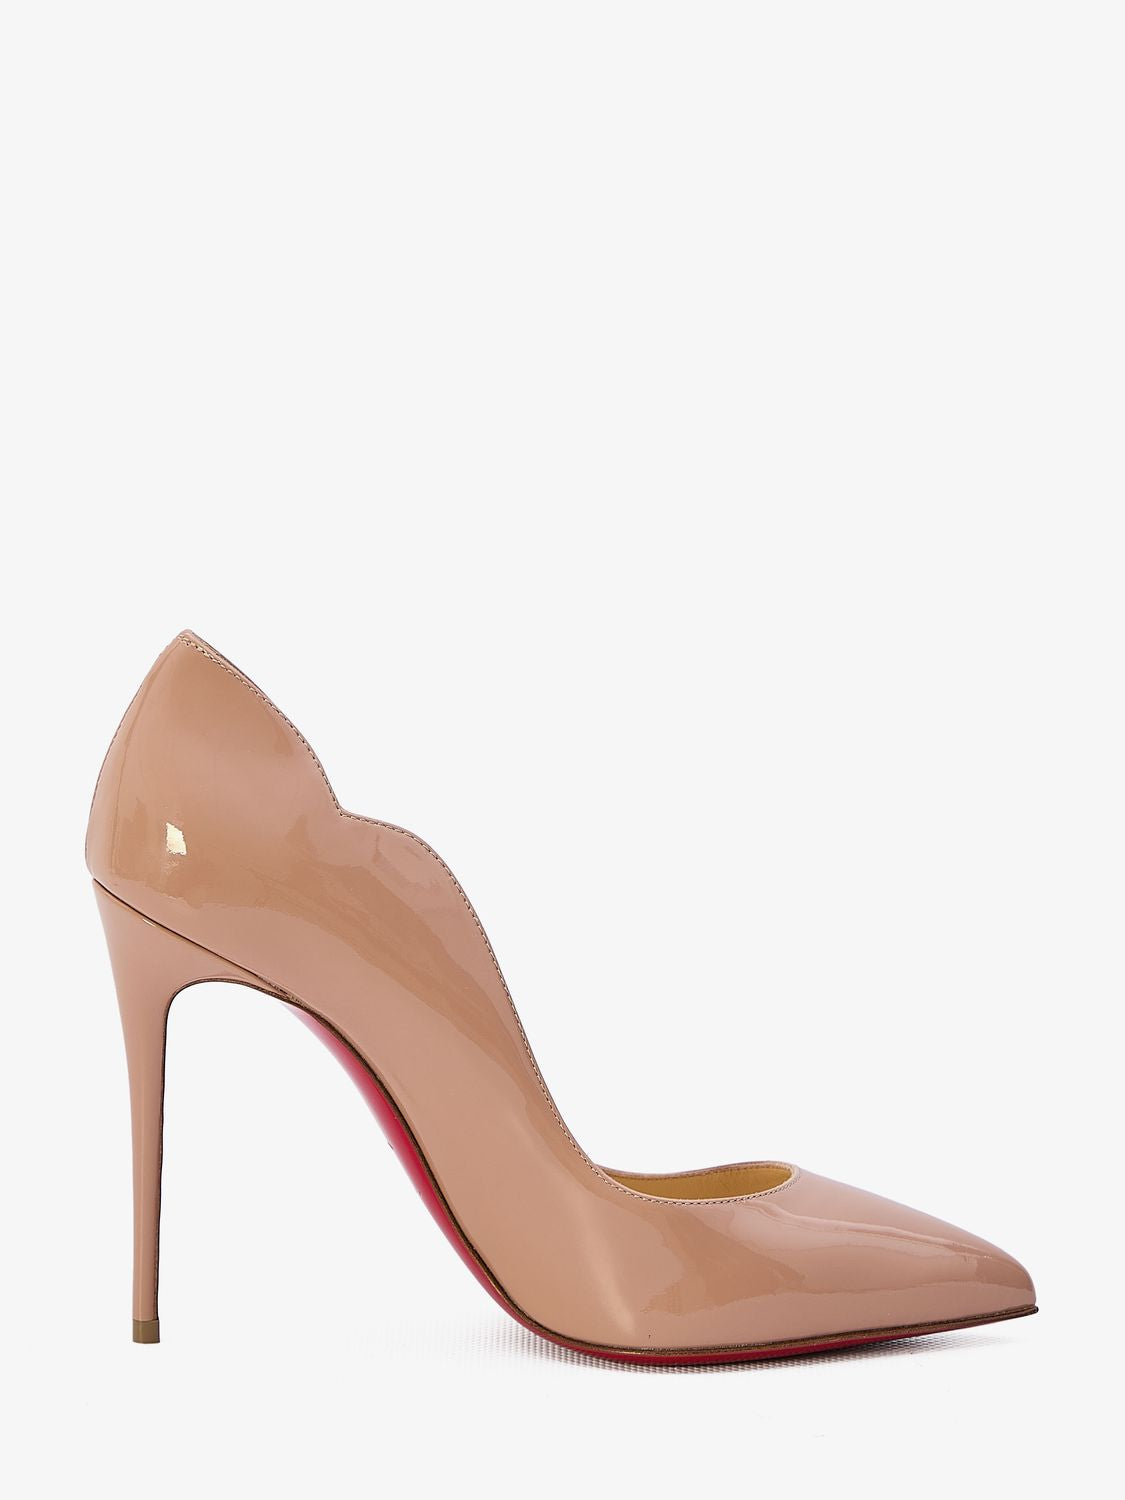 CHRISTIAN LOUBOUTIN Nude Patent Hot Chick 100 Pumps with Scalloped Edges and Red Sole